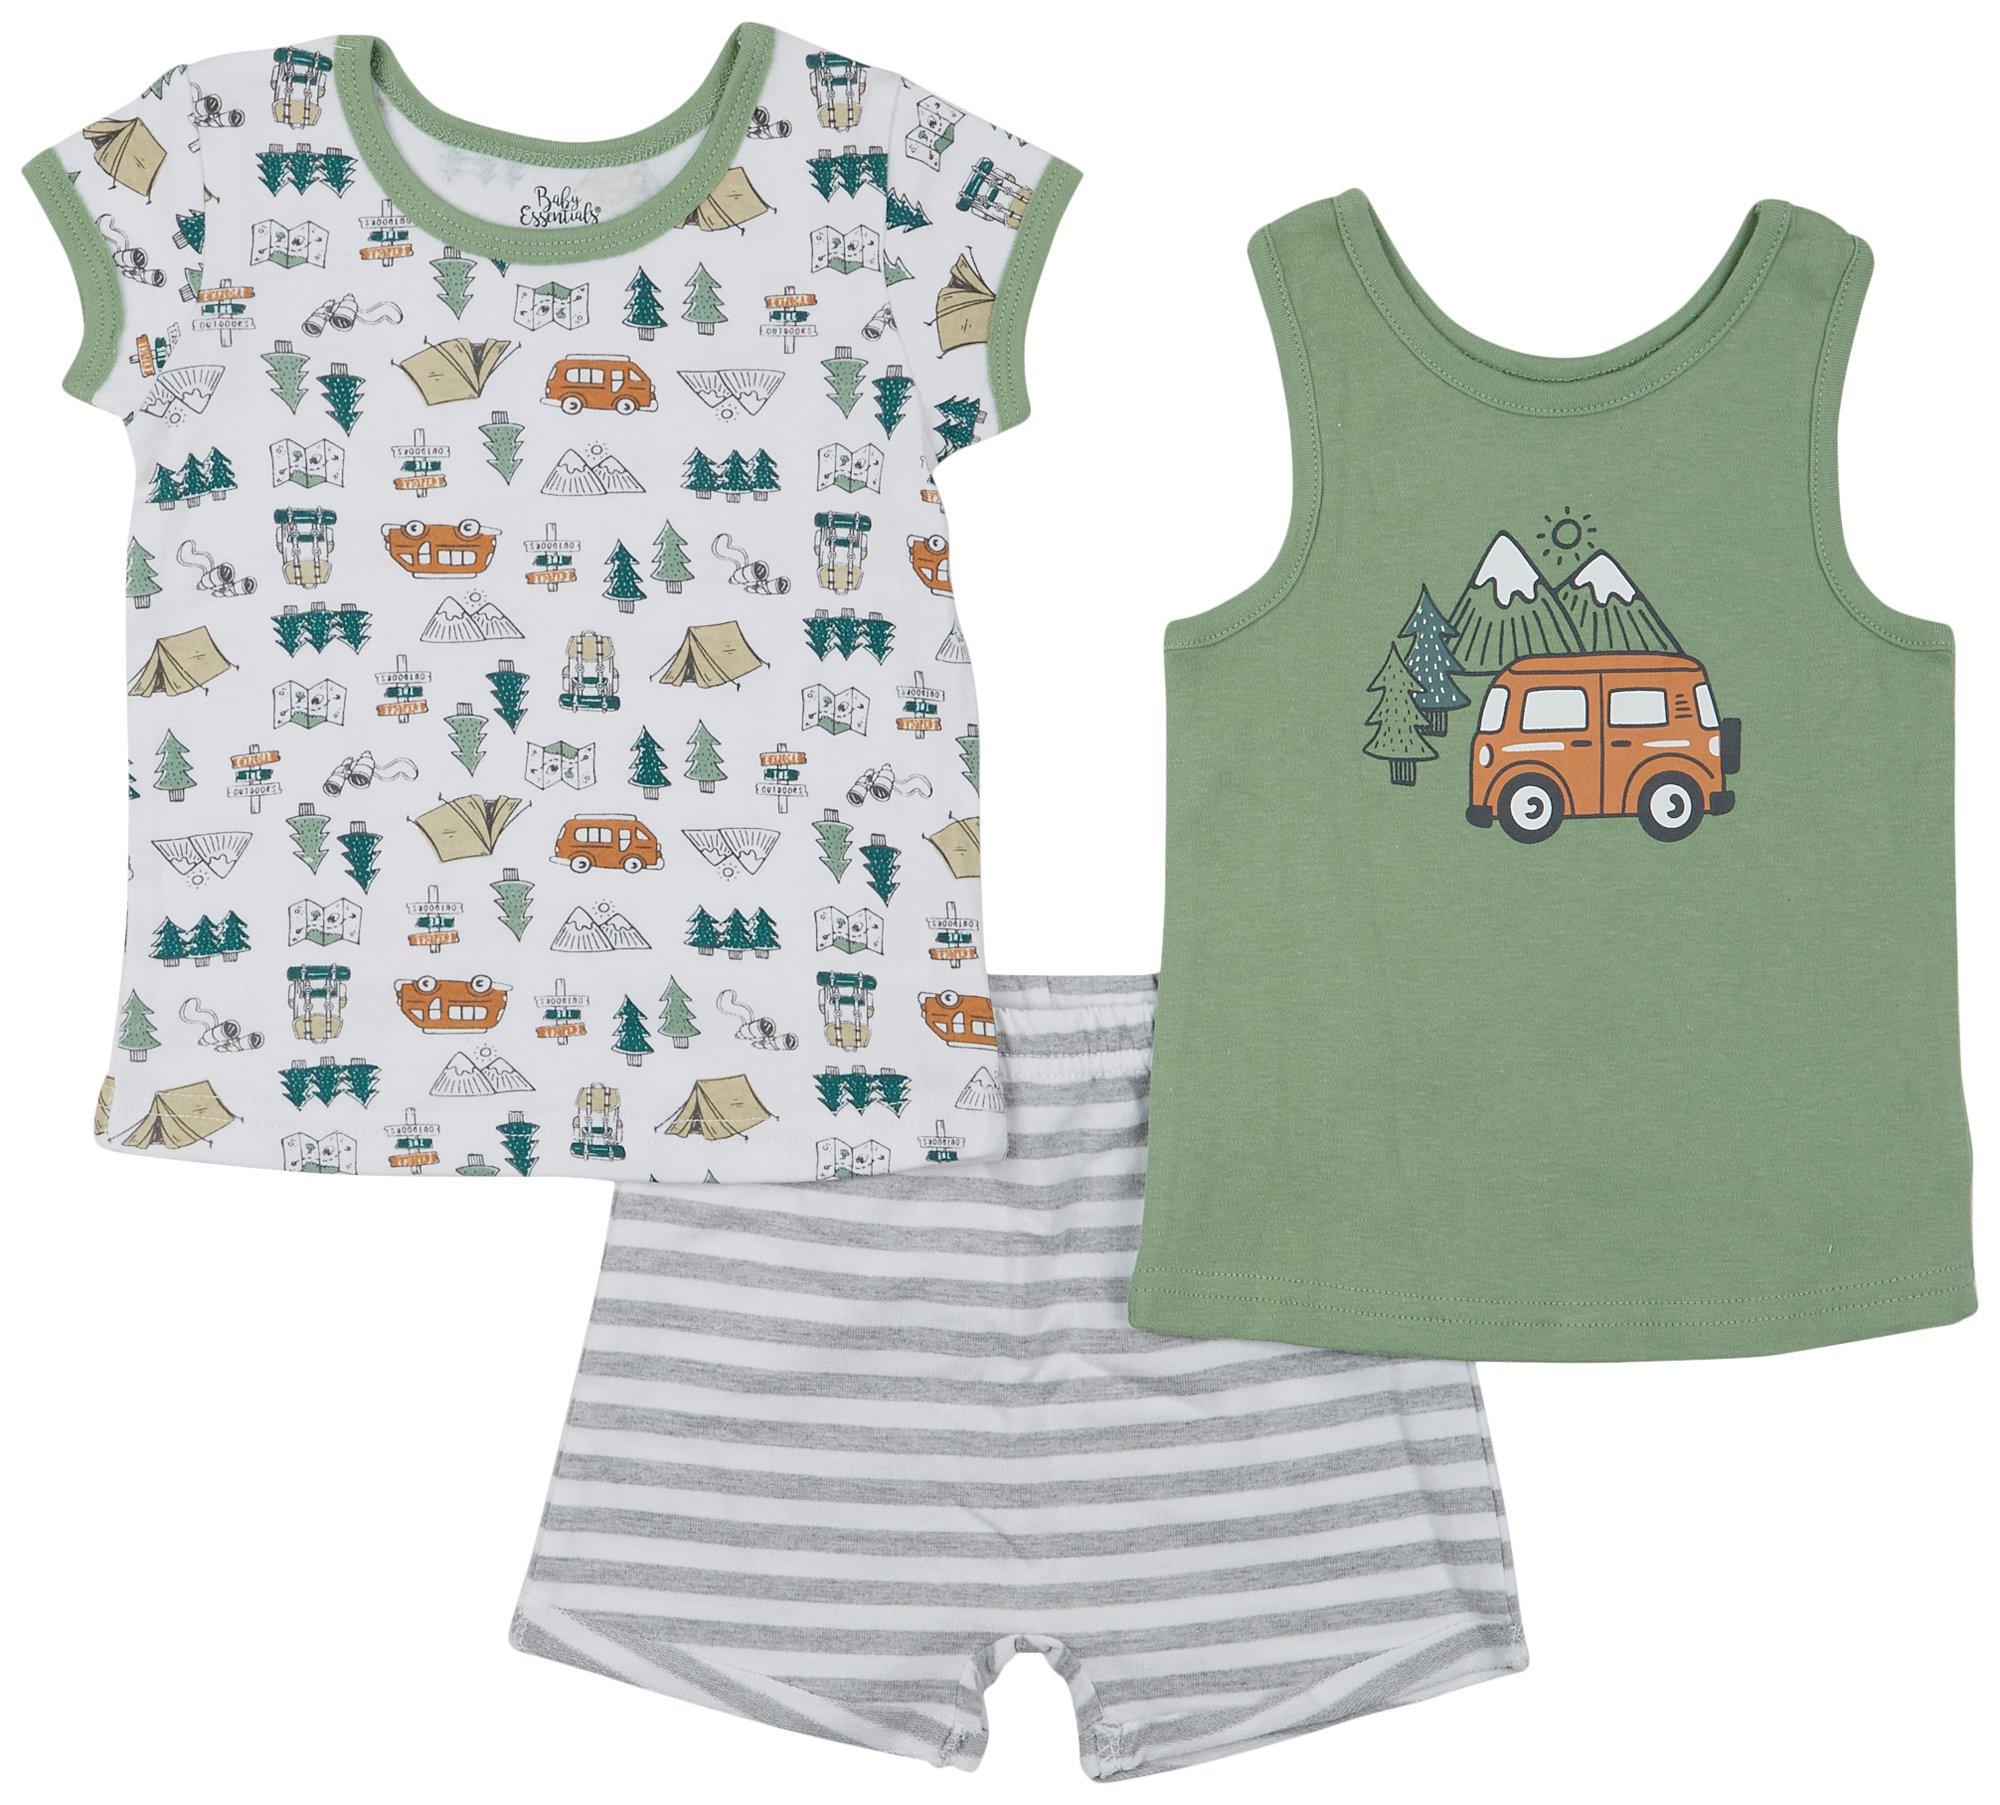 Baby Essentials Baby Boys 3 Pc Camping Shorts Set